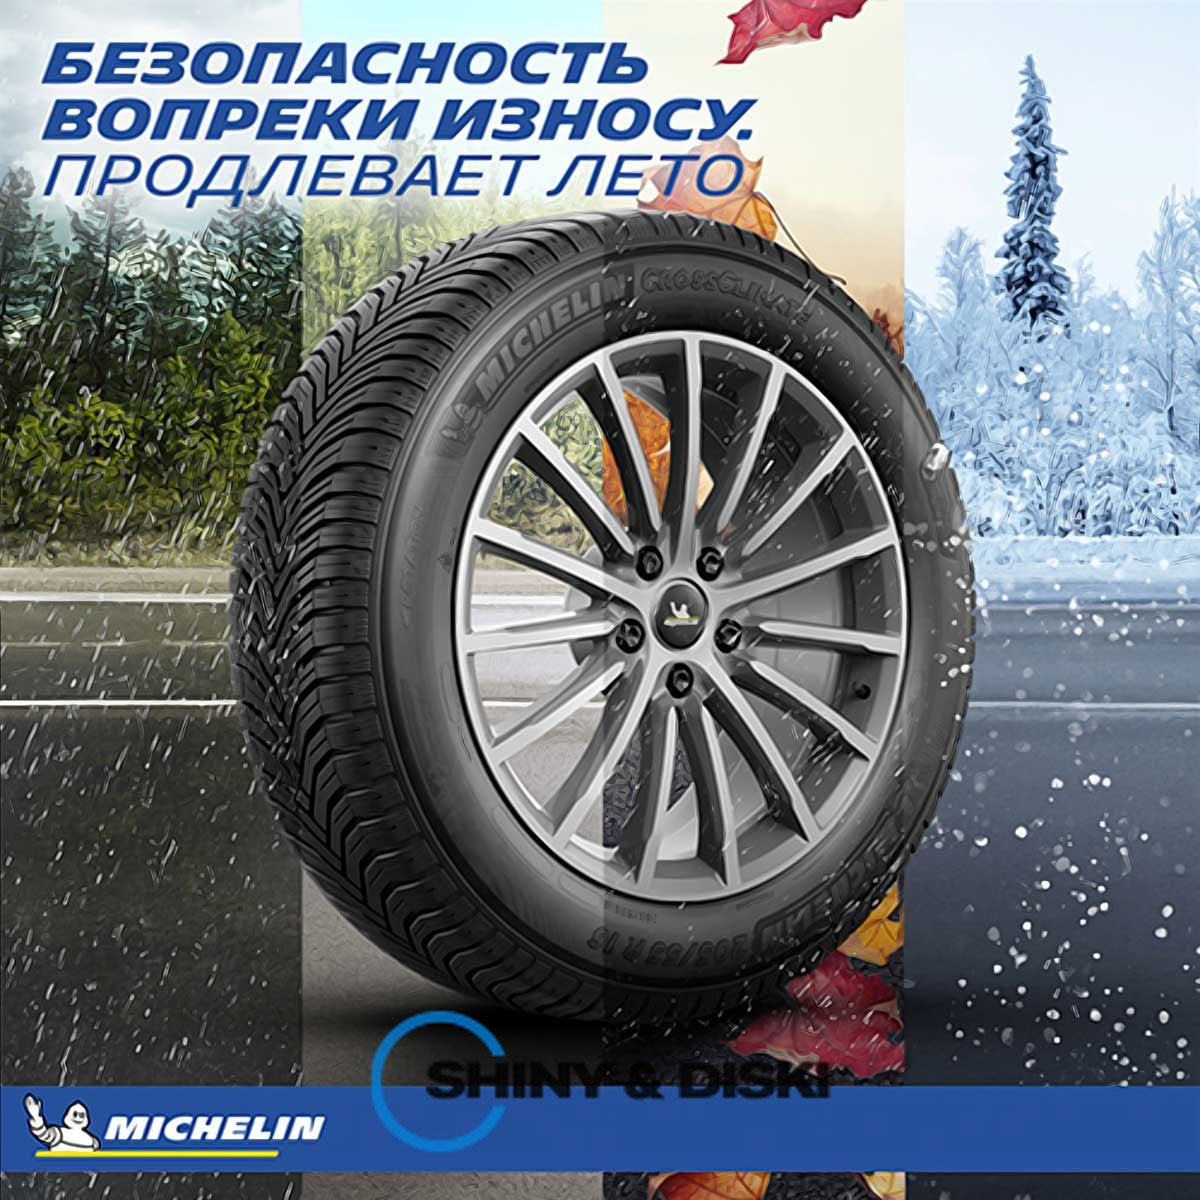 покрышки michelin cross climate+ 185/55 r15 95h